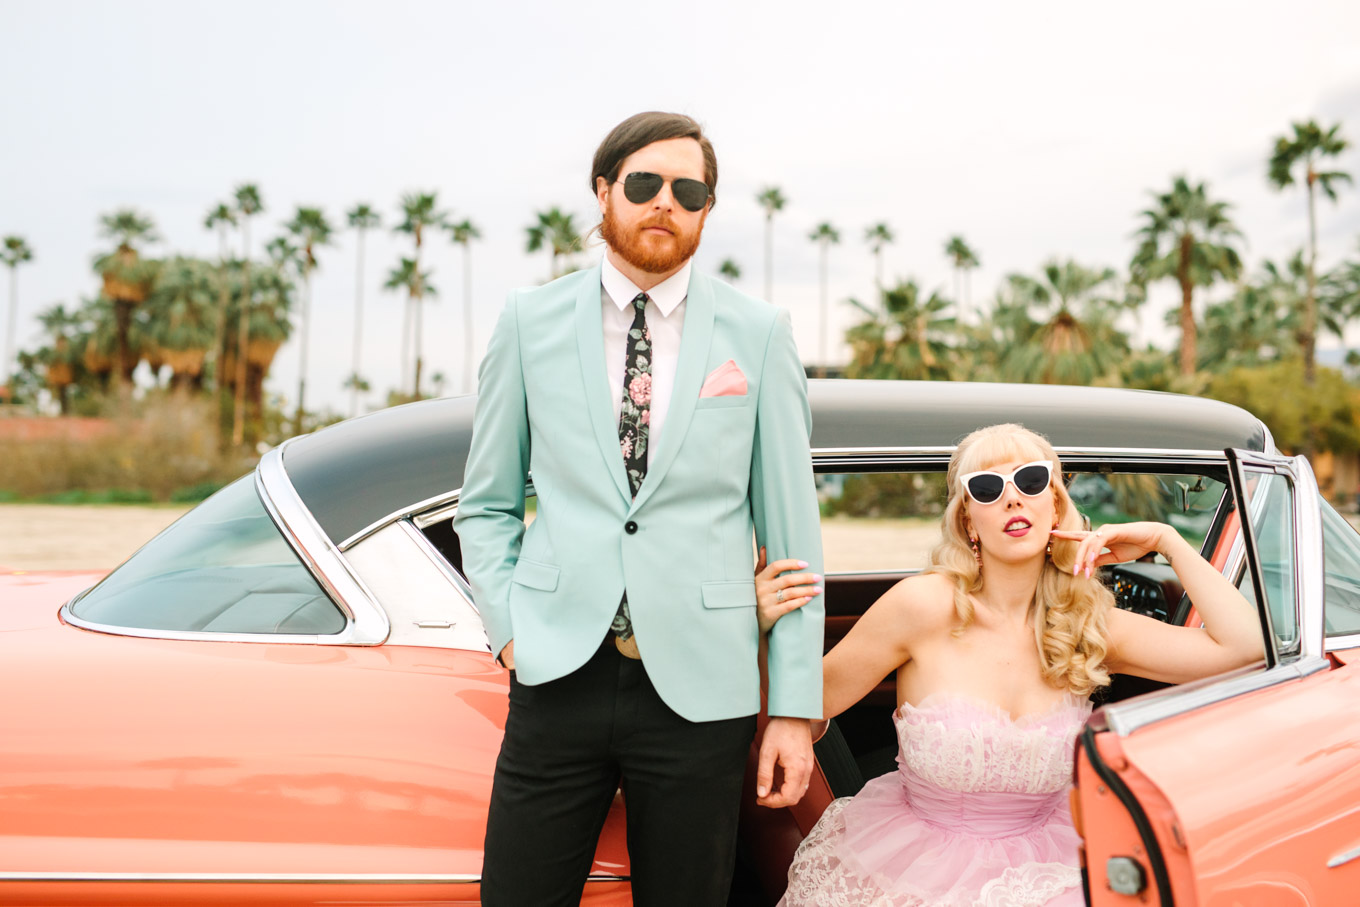 Retro-inspired couple in sunglasses. Modern vintage-inspired Palm Springs engagement session with a 1960s pink Cadillac, retro clothing, and flowers by Shindig Chic. | Colorful and elevated wedding inspiration for fun-loving couples in Southern California | #engagementsession #PalmSpringsengagement #vintageweddingdress #floralcar #pinkcar   Source: Mary Costa Photography | Los Angeles